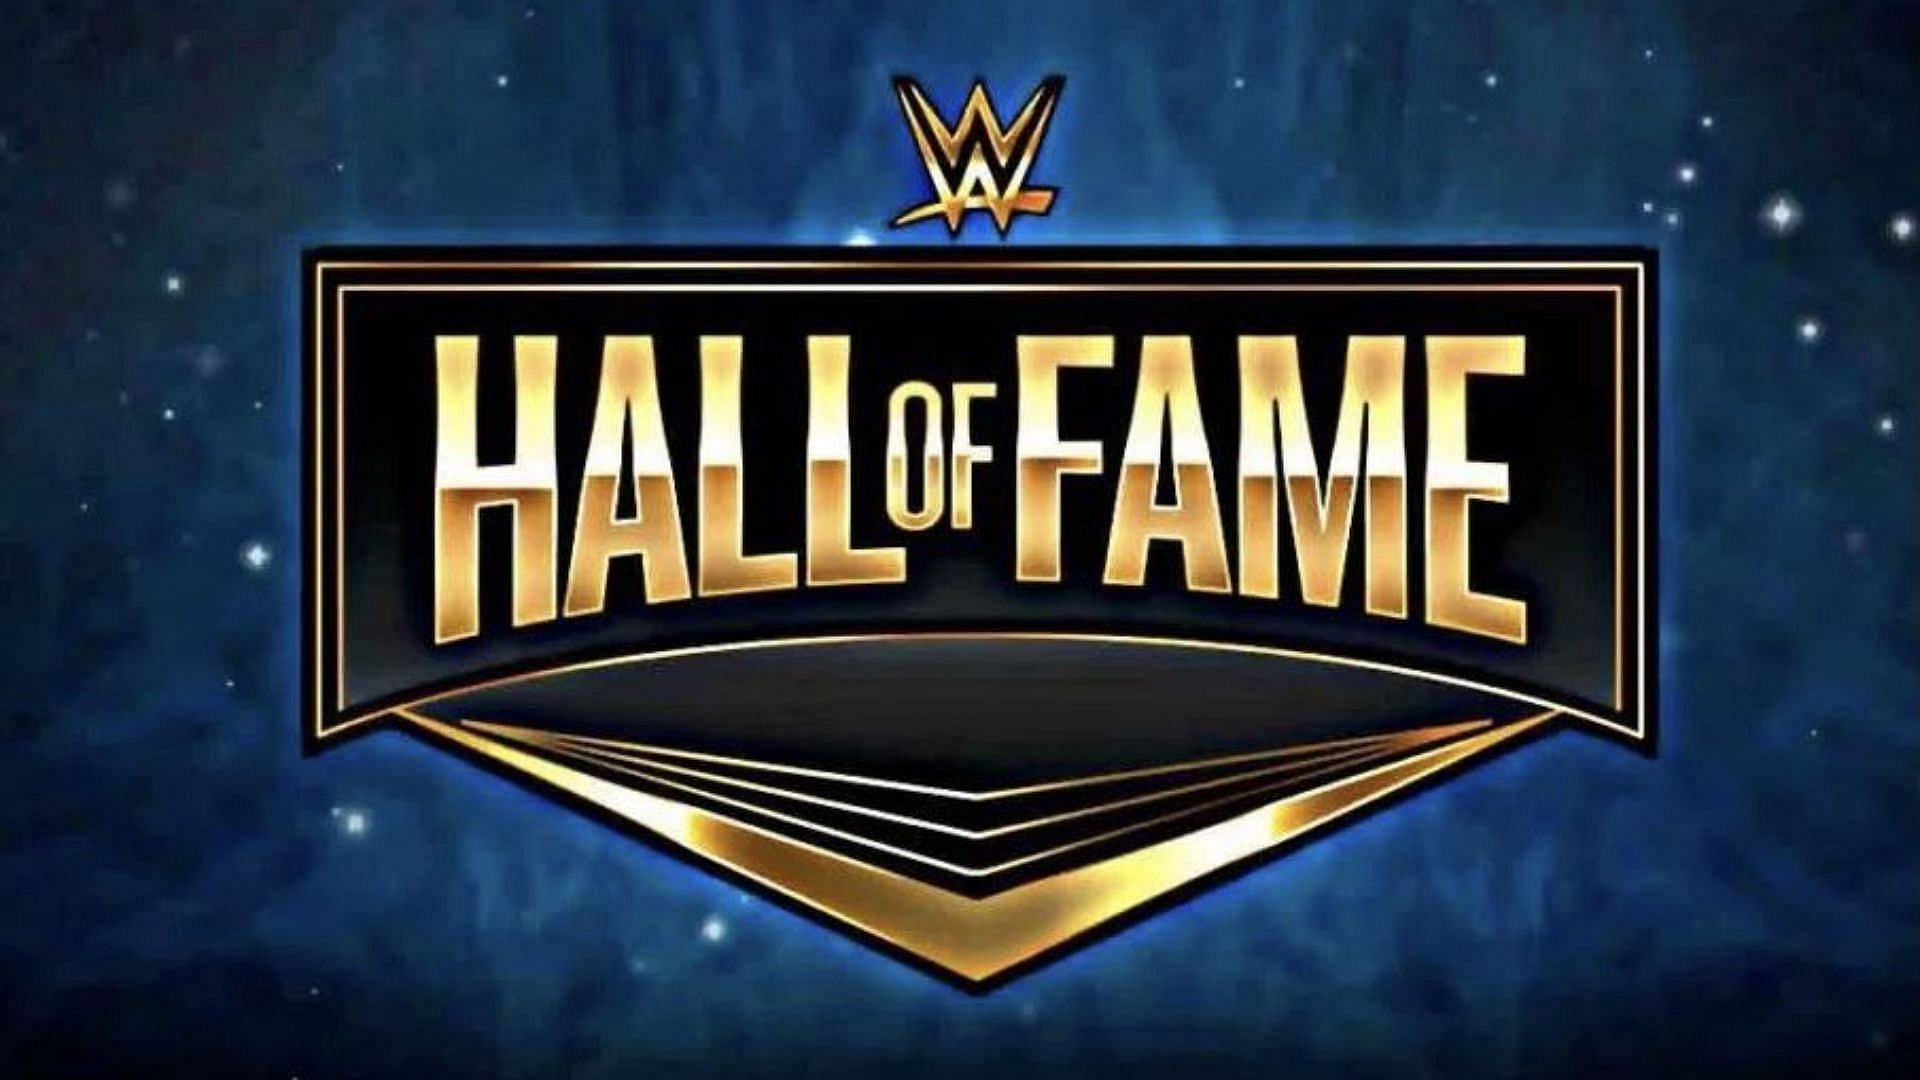 WWE has been using his Hall of Fame logo since 2019.